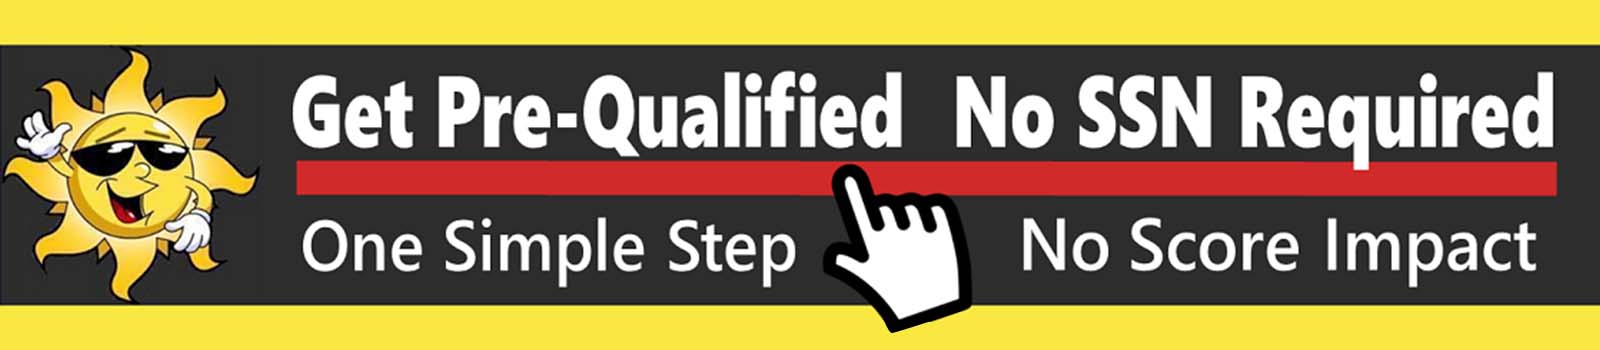 Get Pre-Qualified with No SSN Required